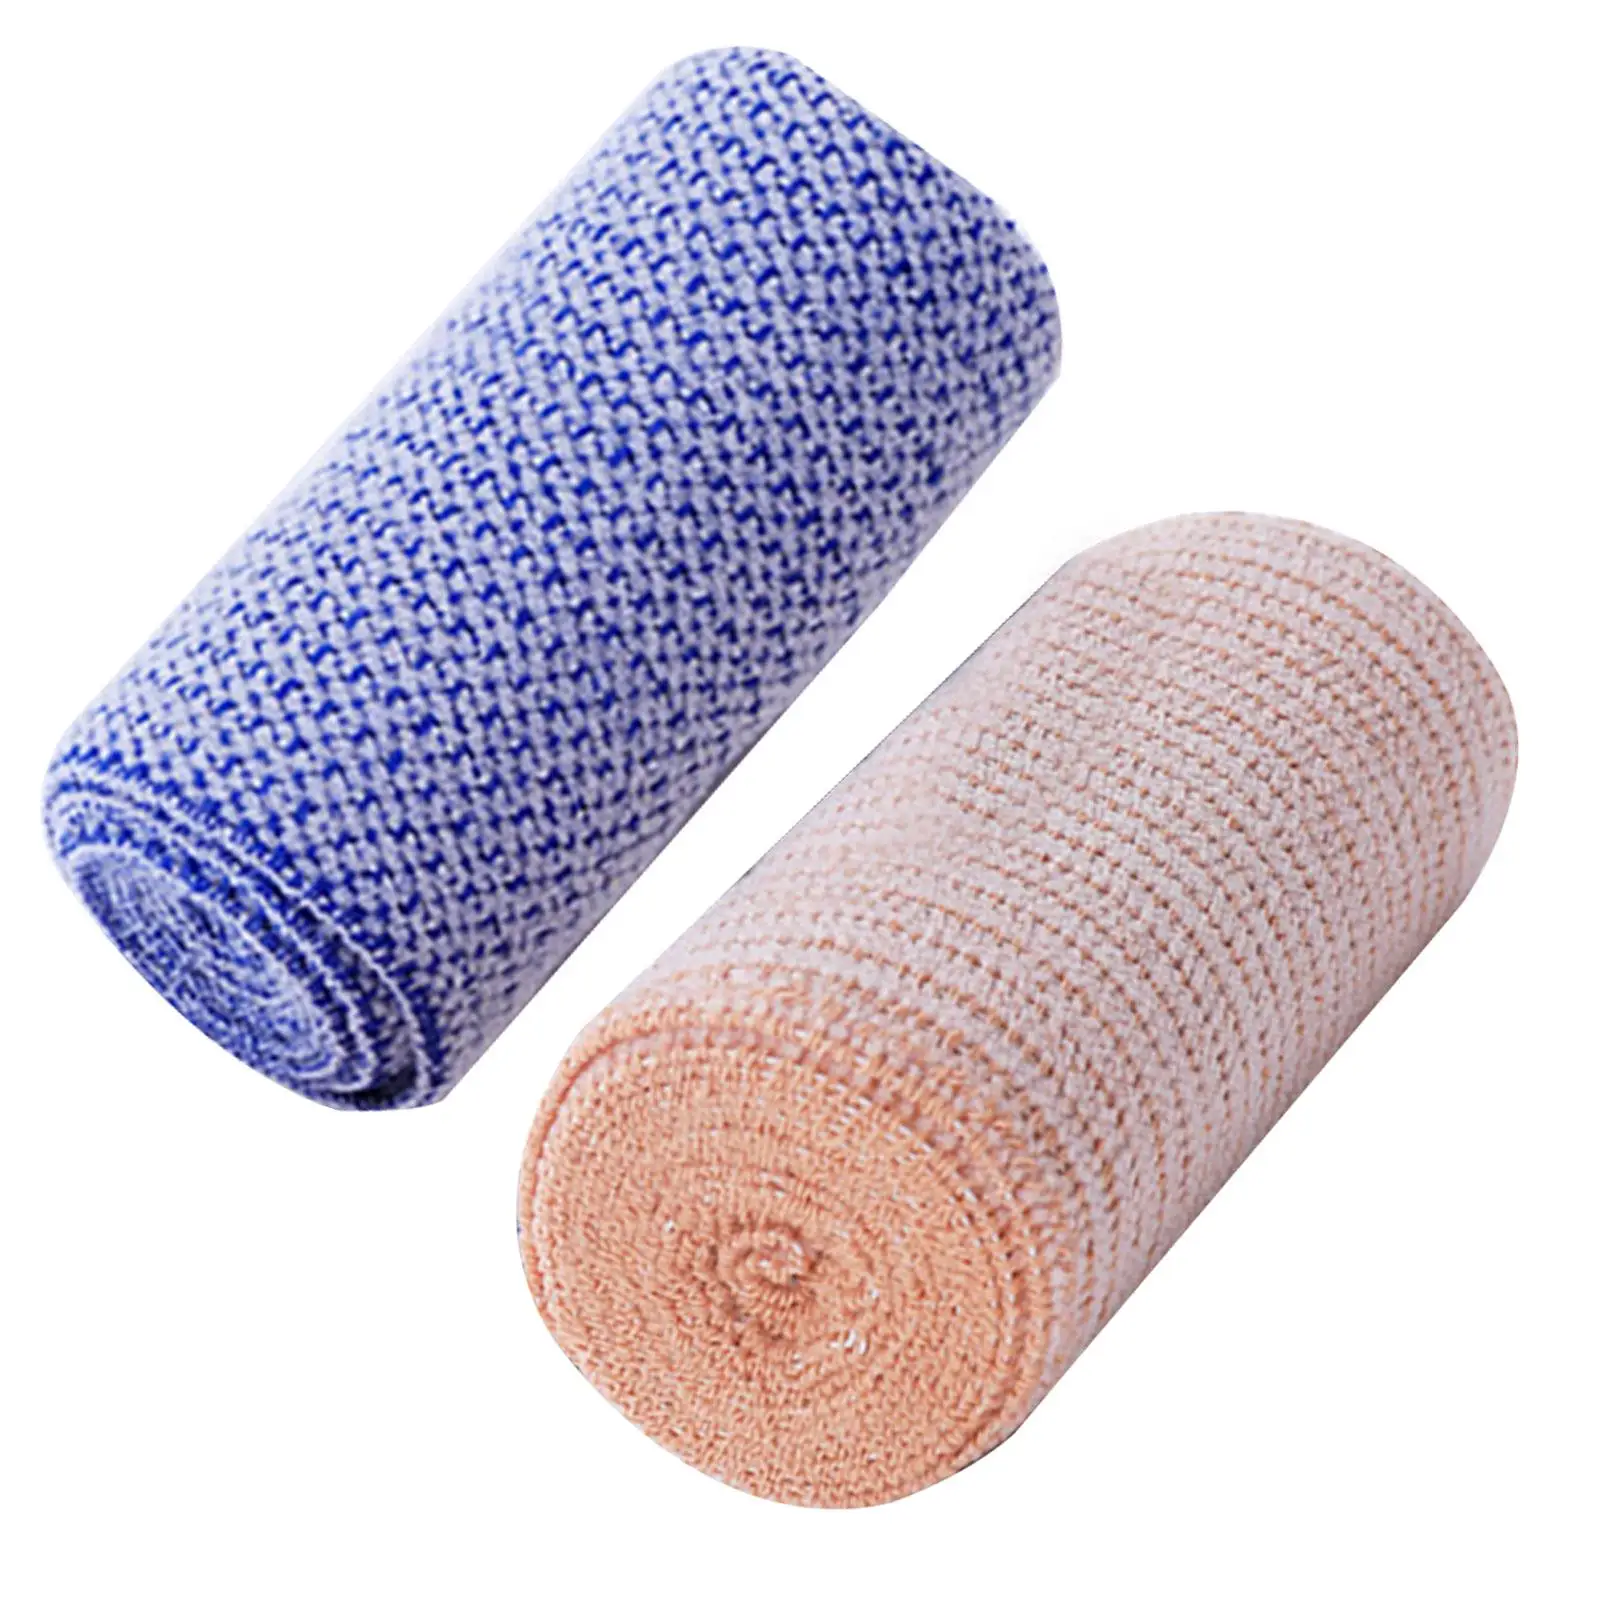 Sports Bandage Wrap Elastic Bandage Wrap Elastic Durable Leg Wrist and Ankle Foot Wrap Tape Portable Stretched Compression Roll